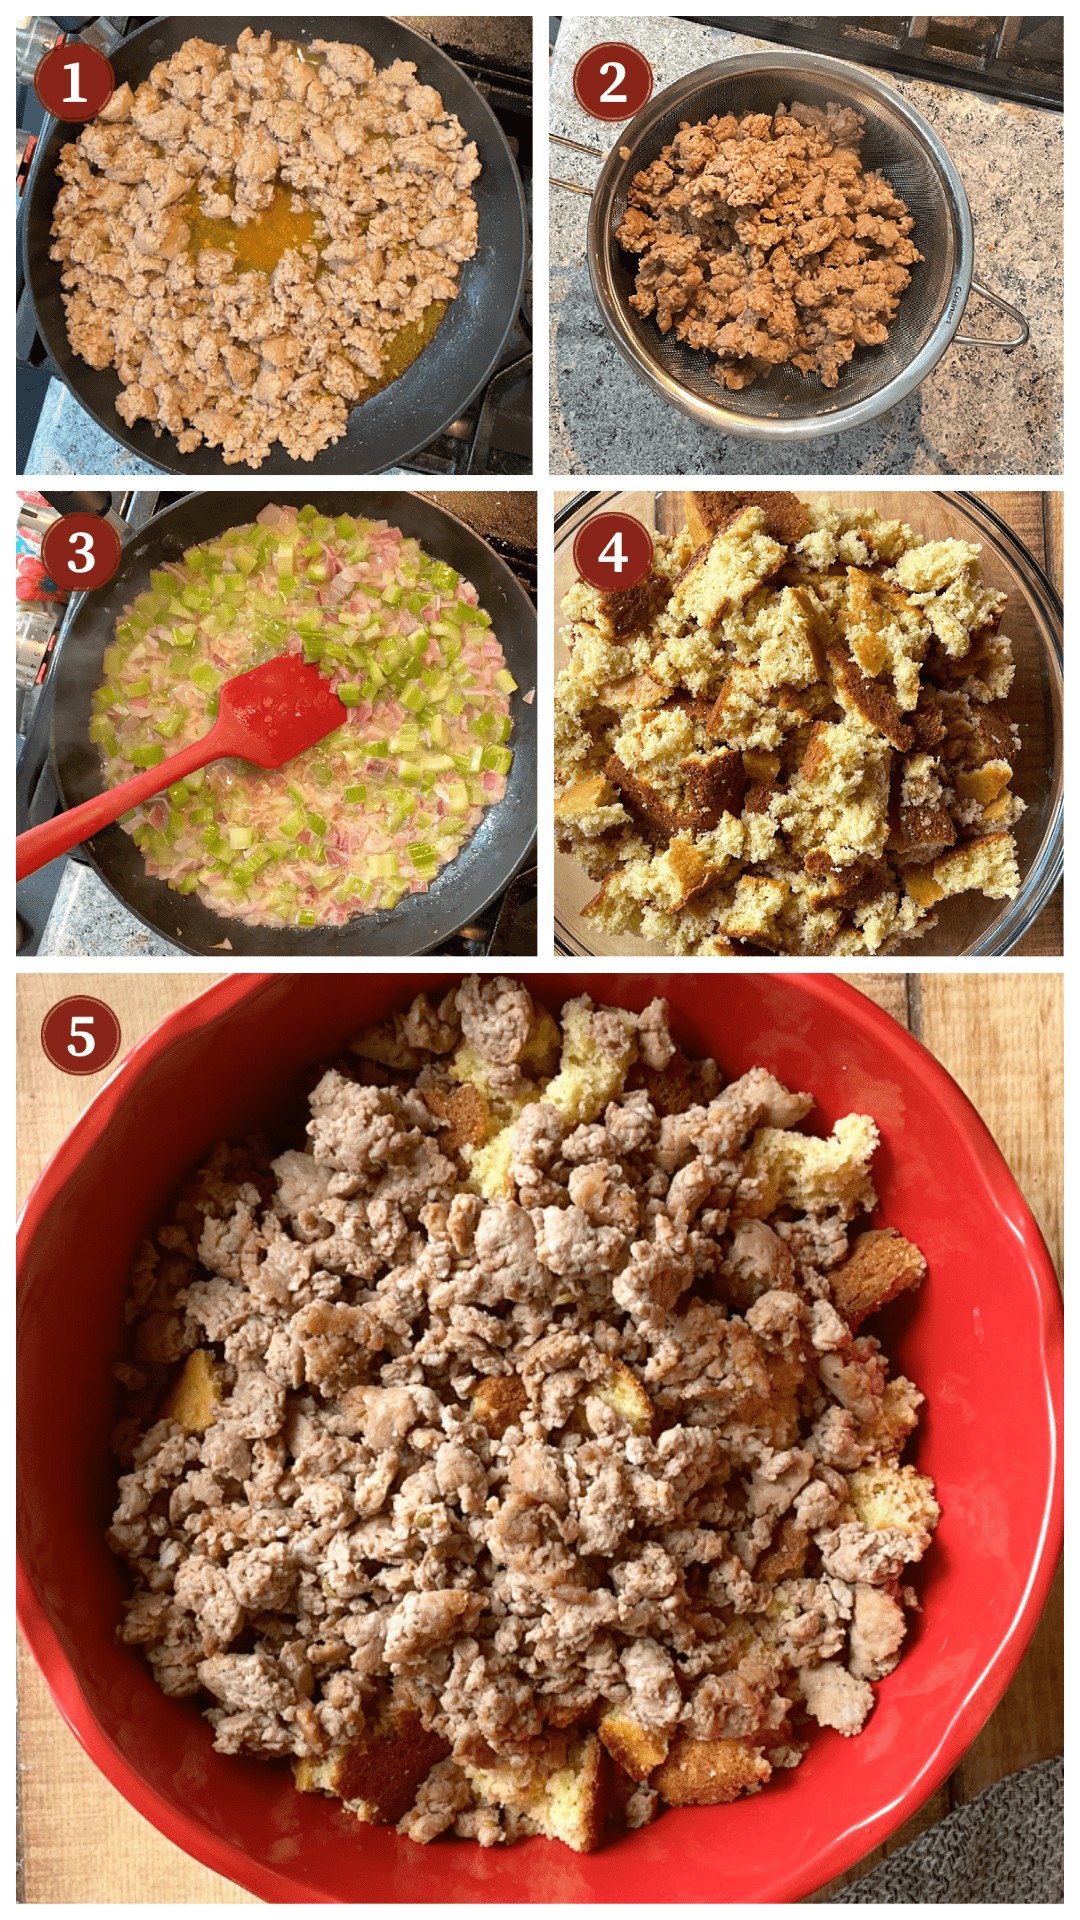 A collage of images showing how to make southern cornbread dressing, steps 1 - 5.